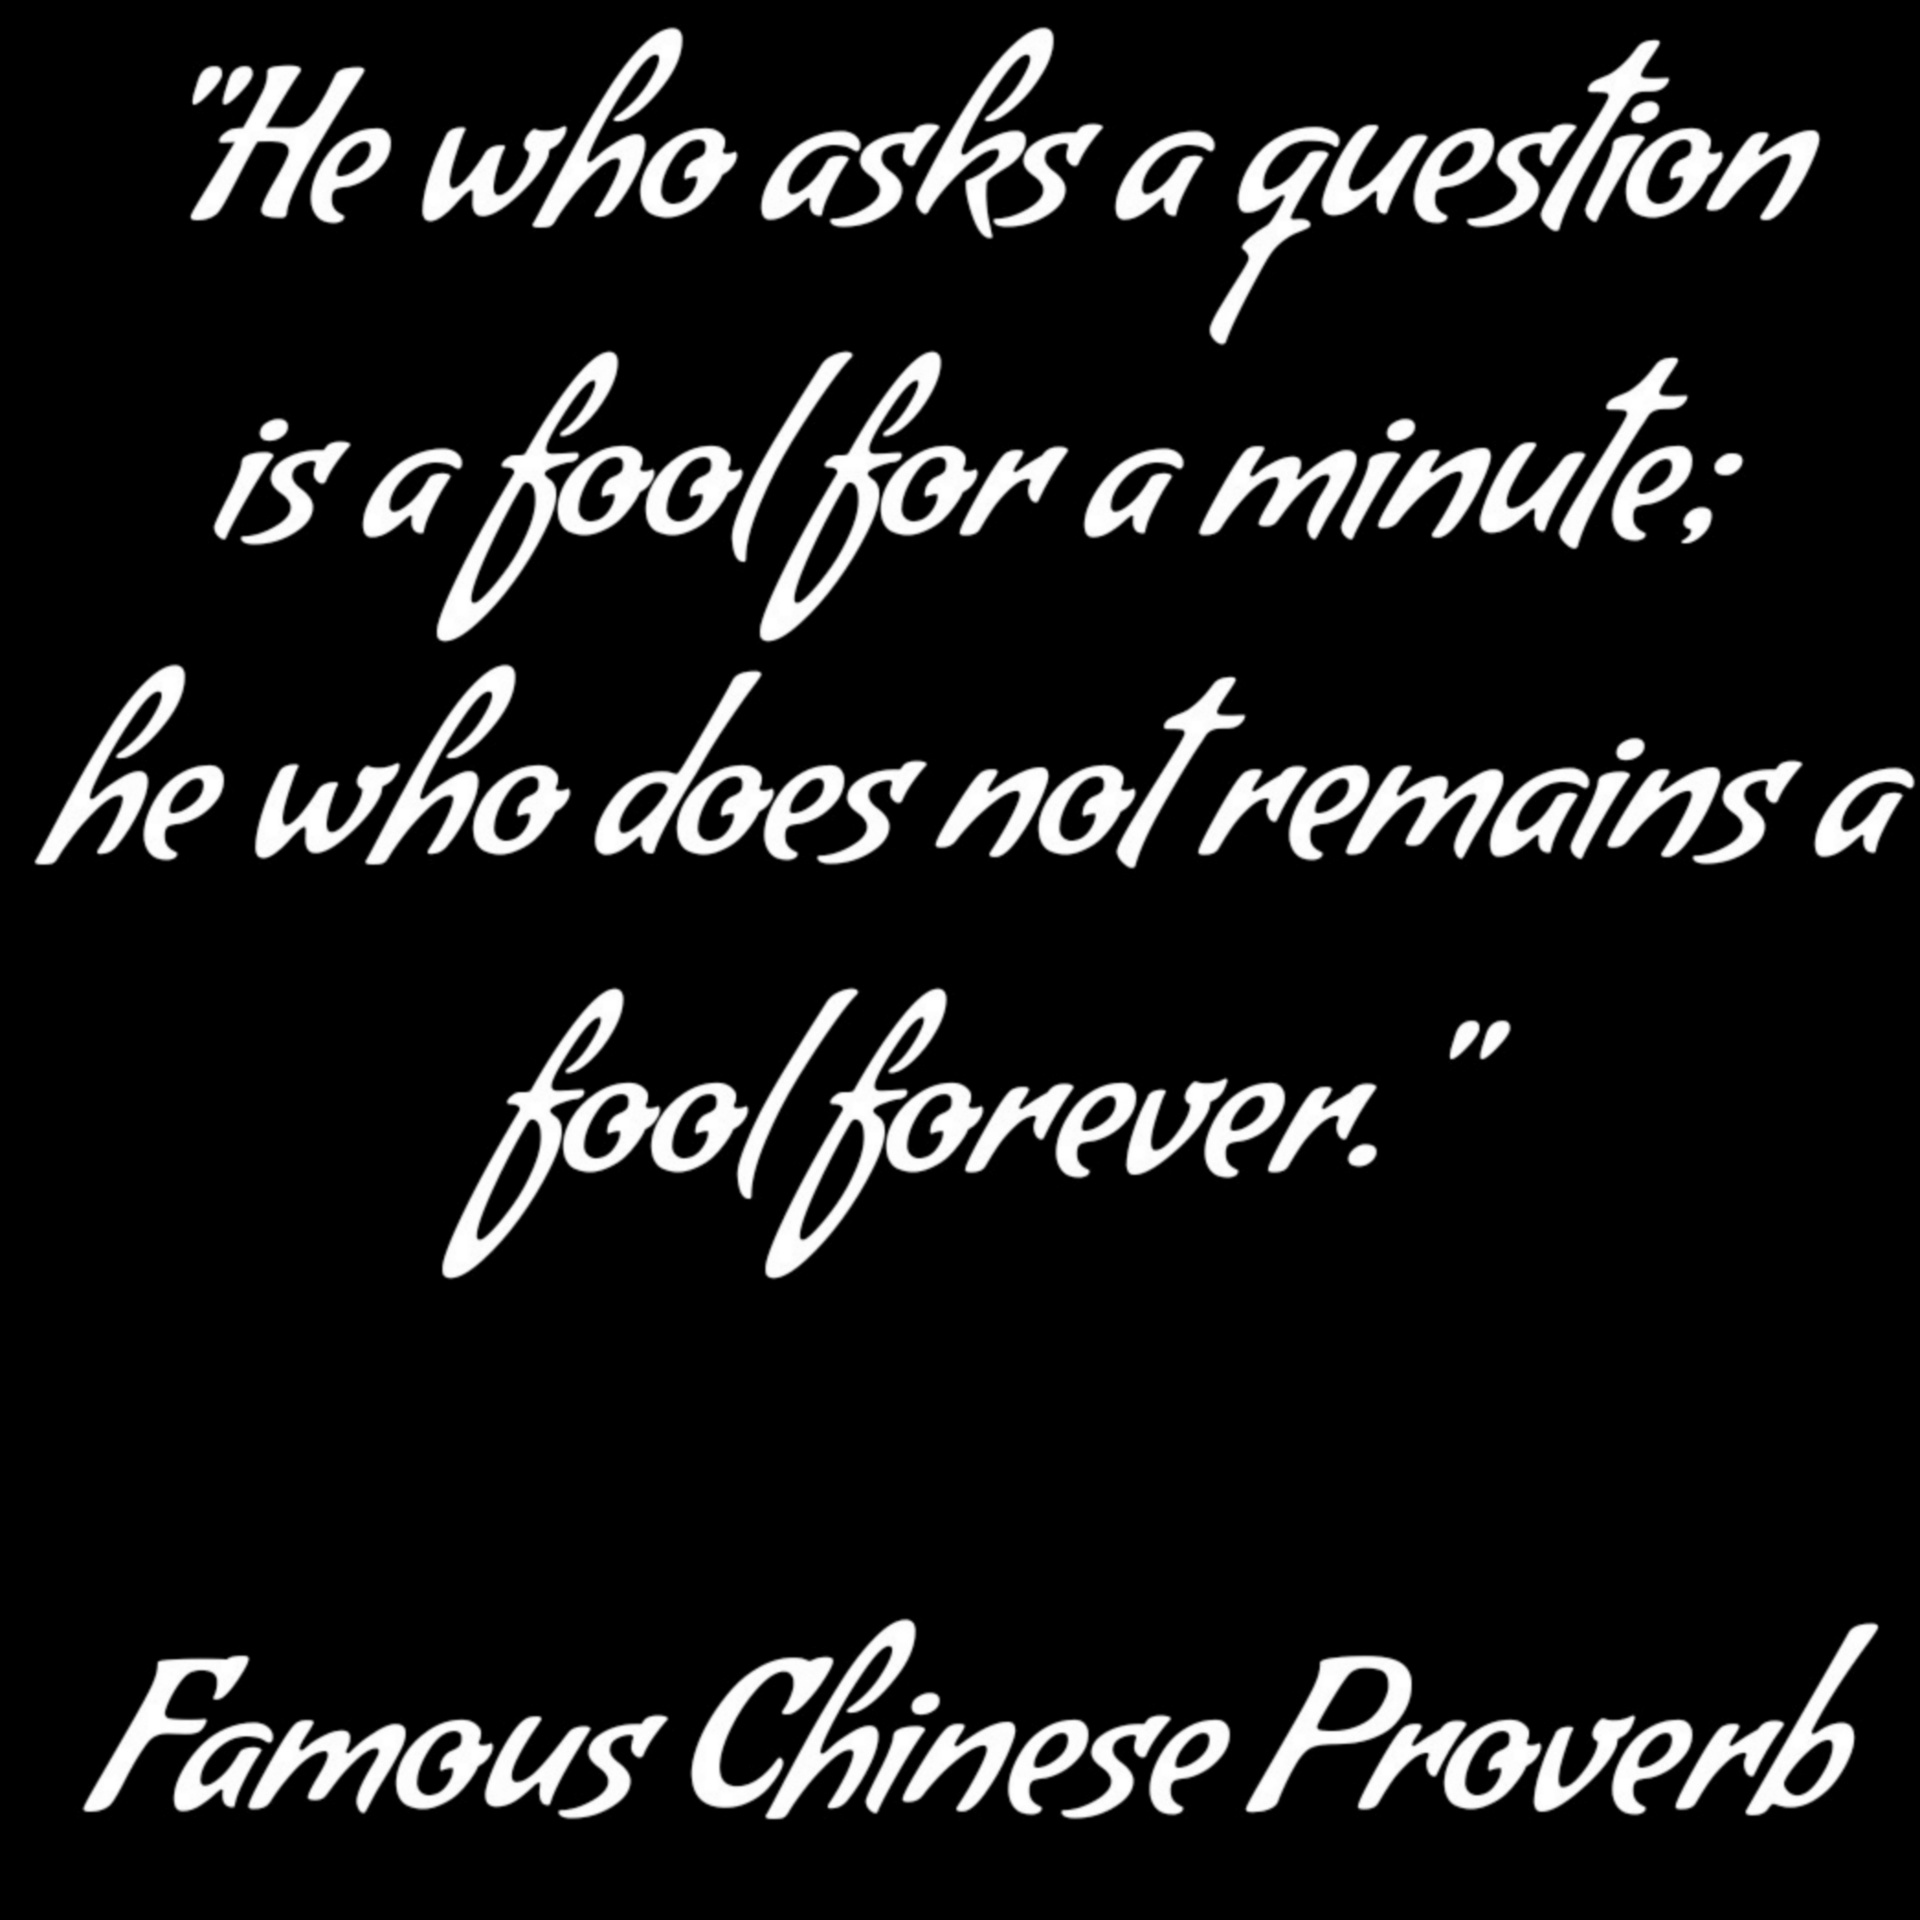 He who asks a question is a fool for a minute, he who does not remains a fool forever. - Famous Chinese Proverb